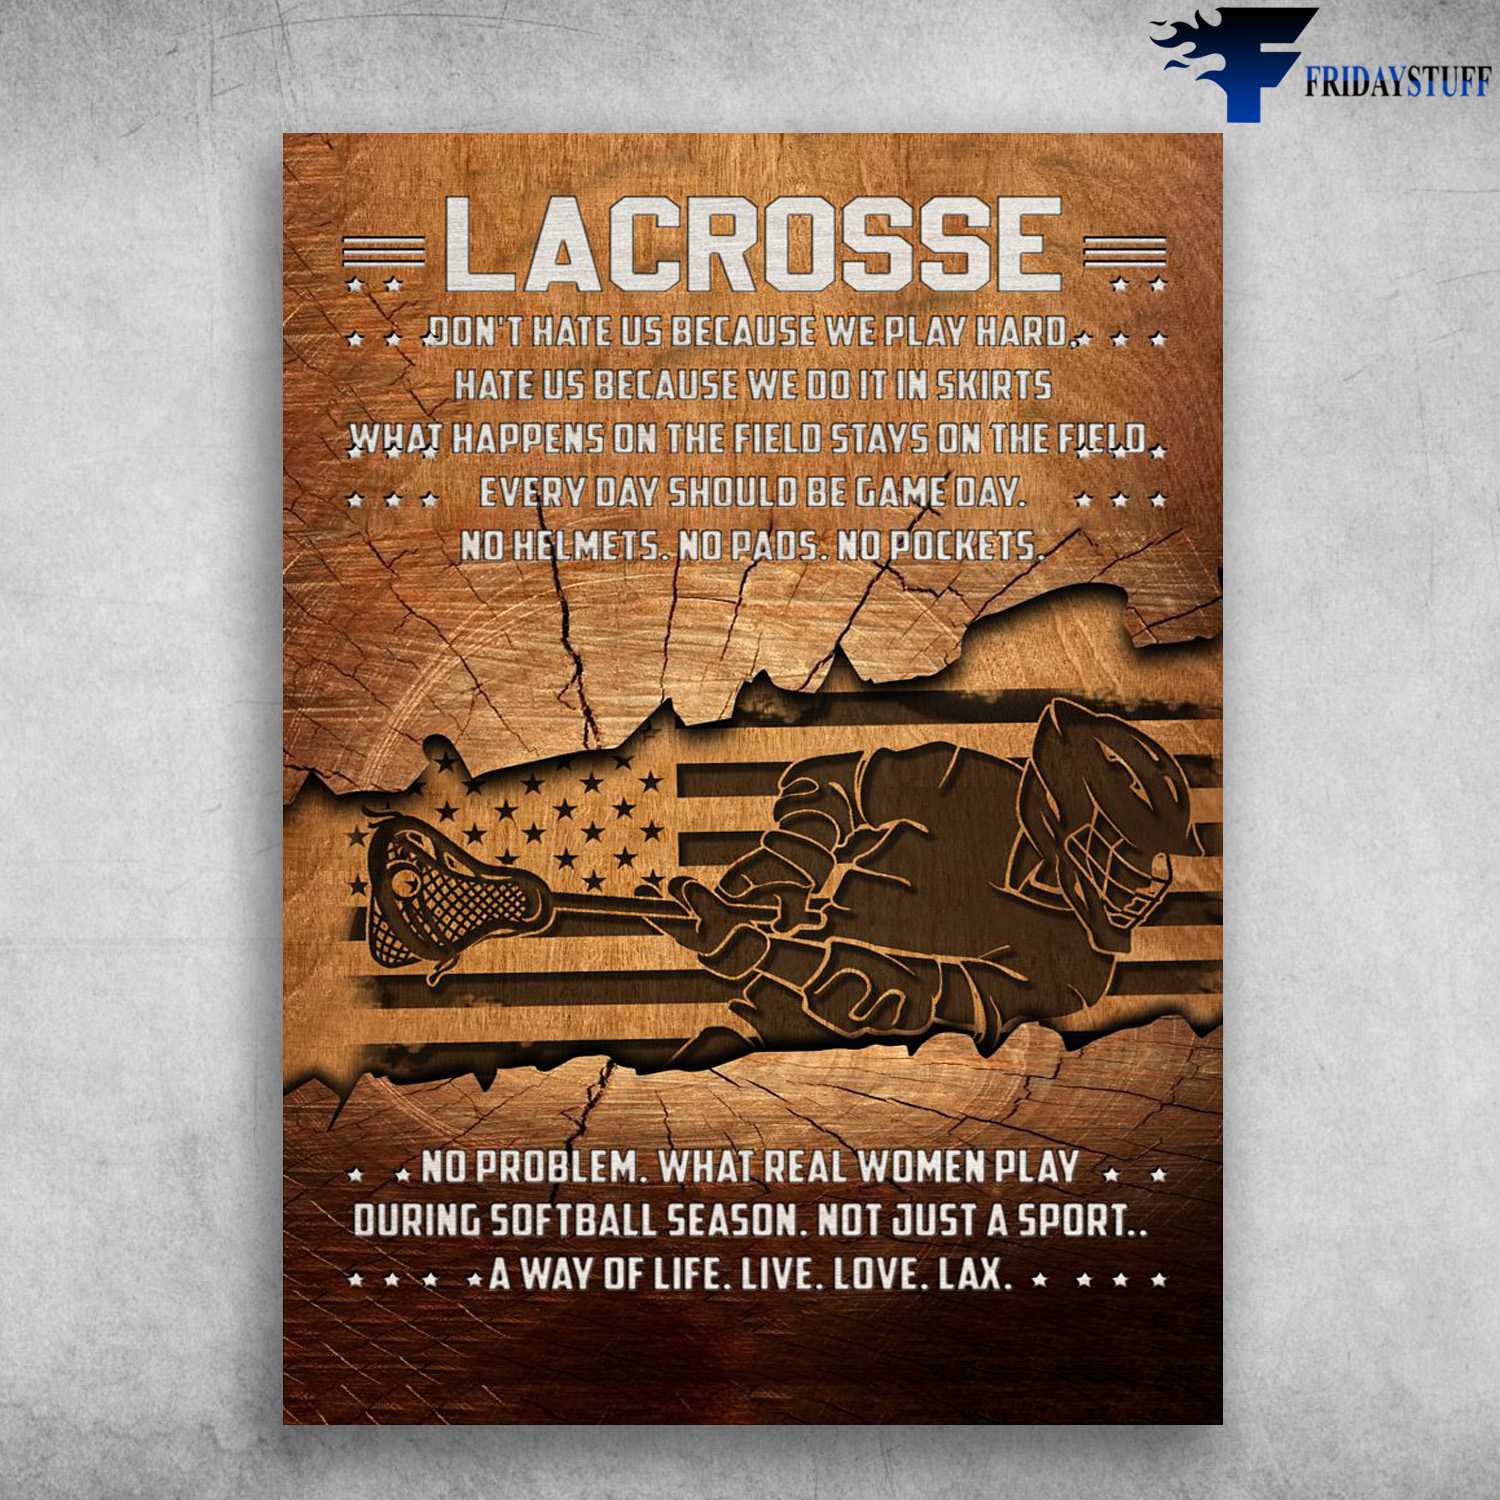 Lacrosse Poster, Lacrosse Player, Lacrosse, Don't Hate Us Because We Play Hard, Hate Us Because We Do It In Skirts, What Happens On The Field, Stays On The Field